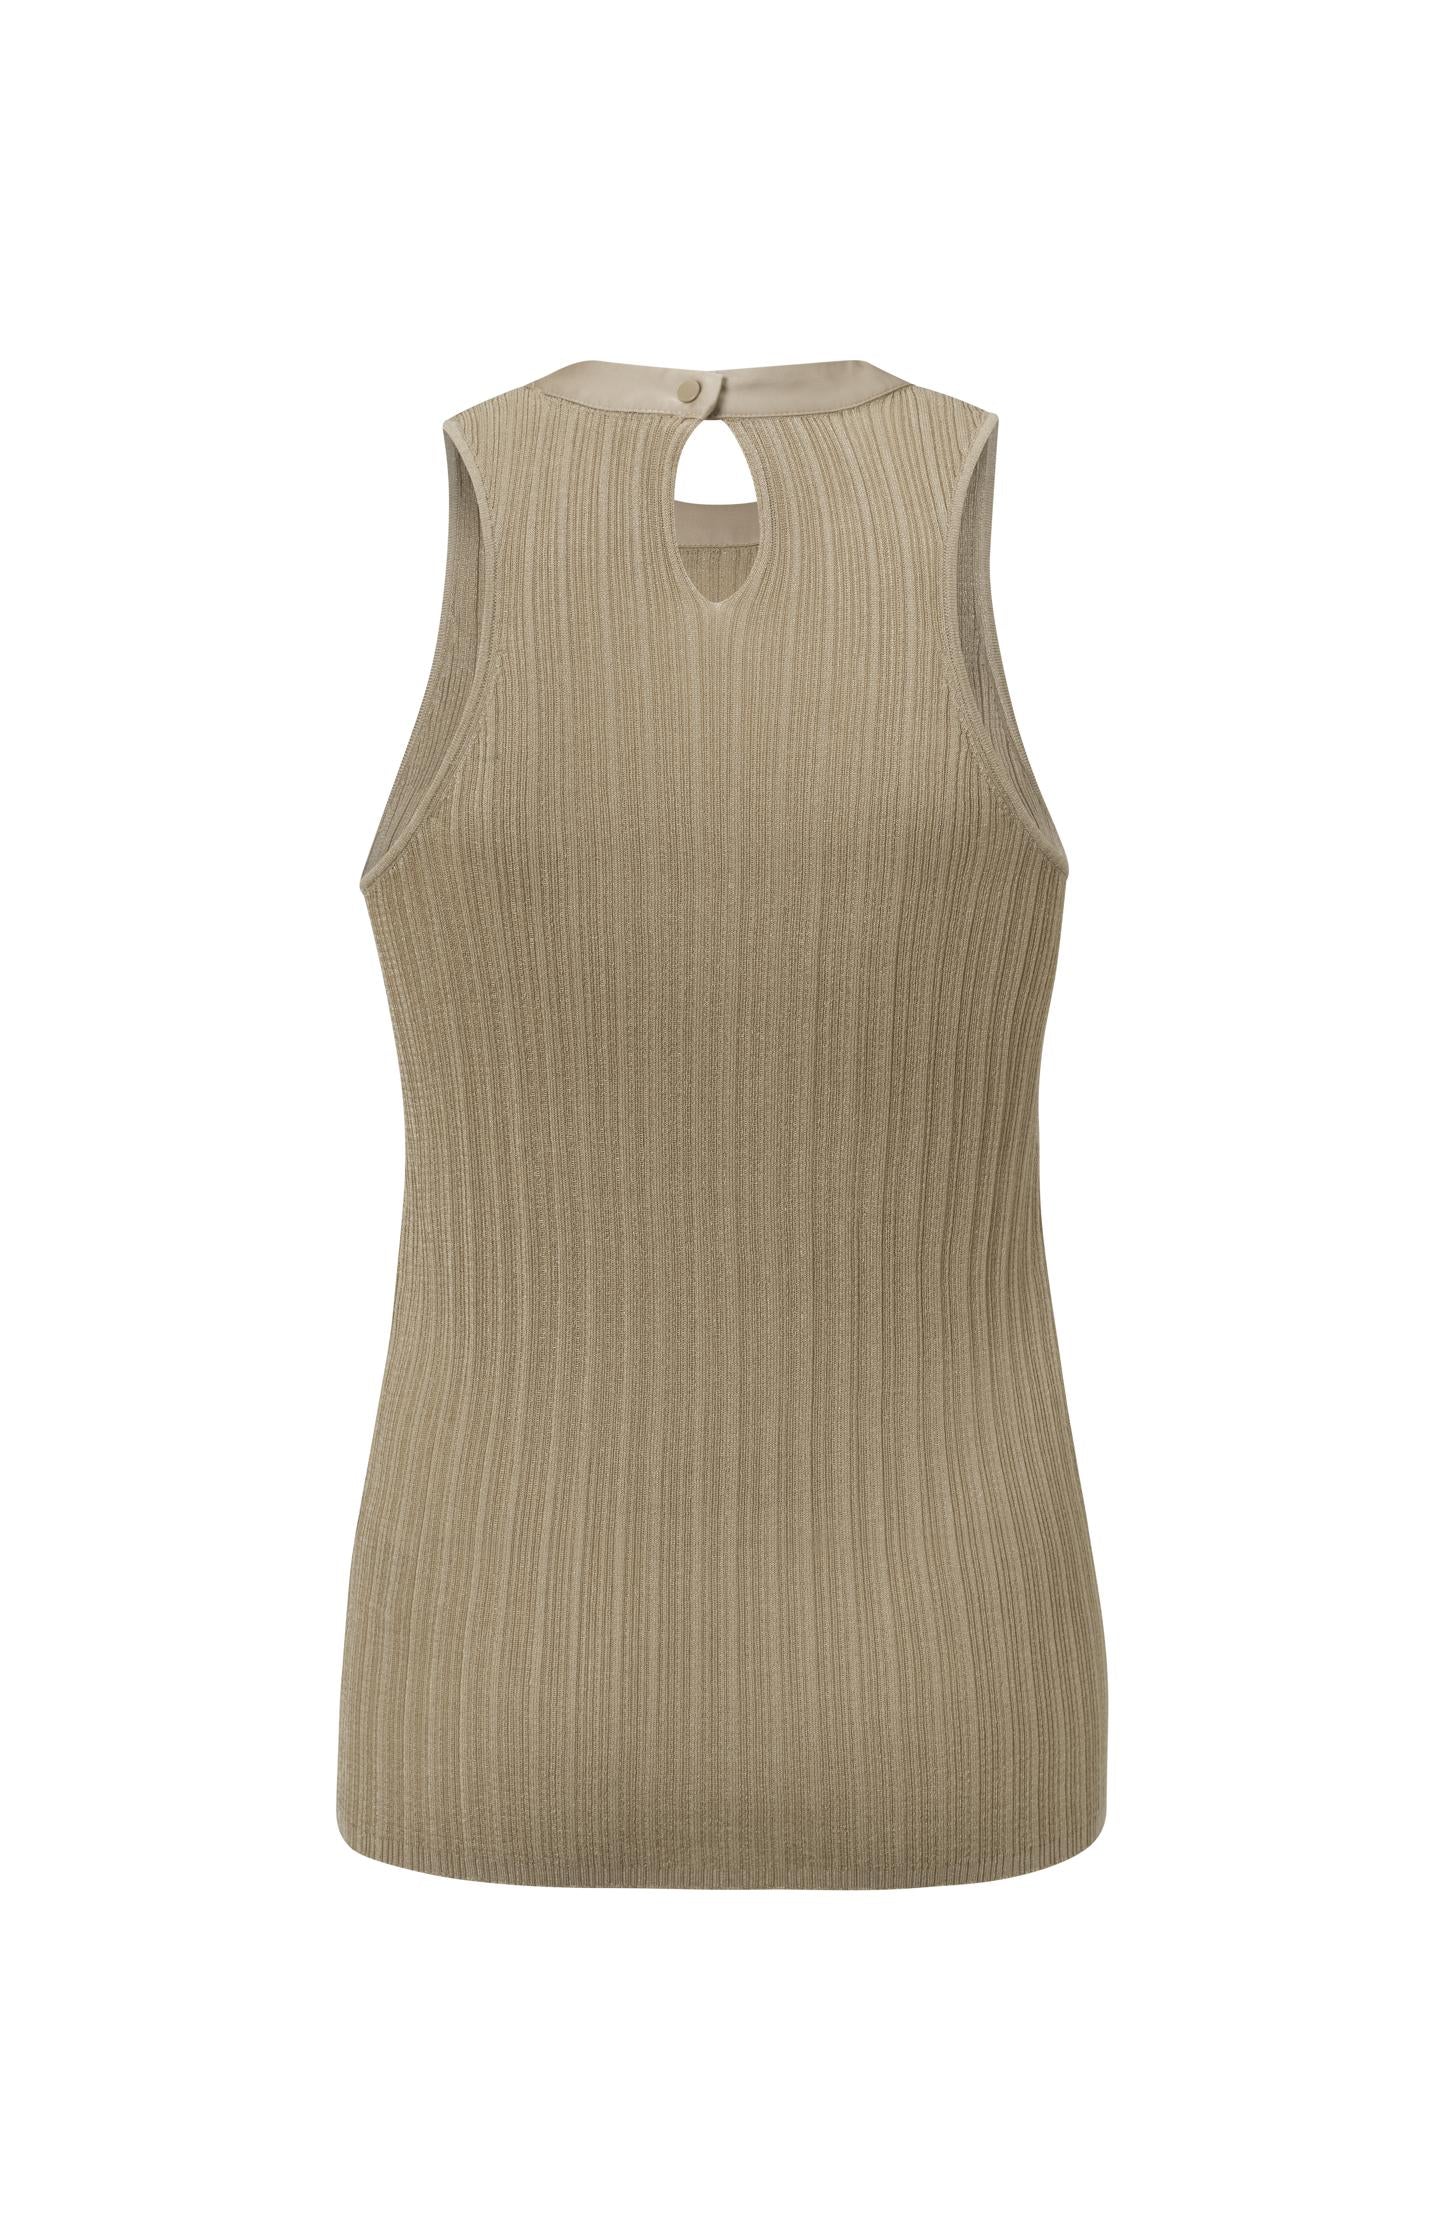 Sheer ribbed tank top with high neck in regular fit